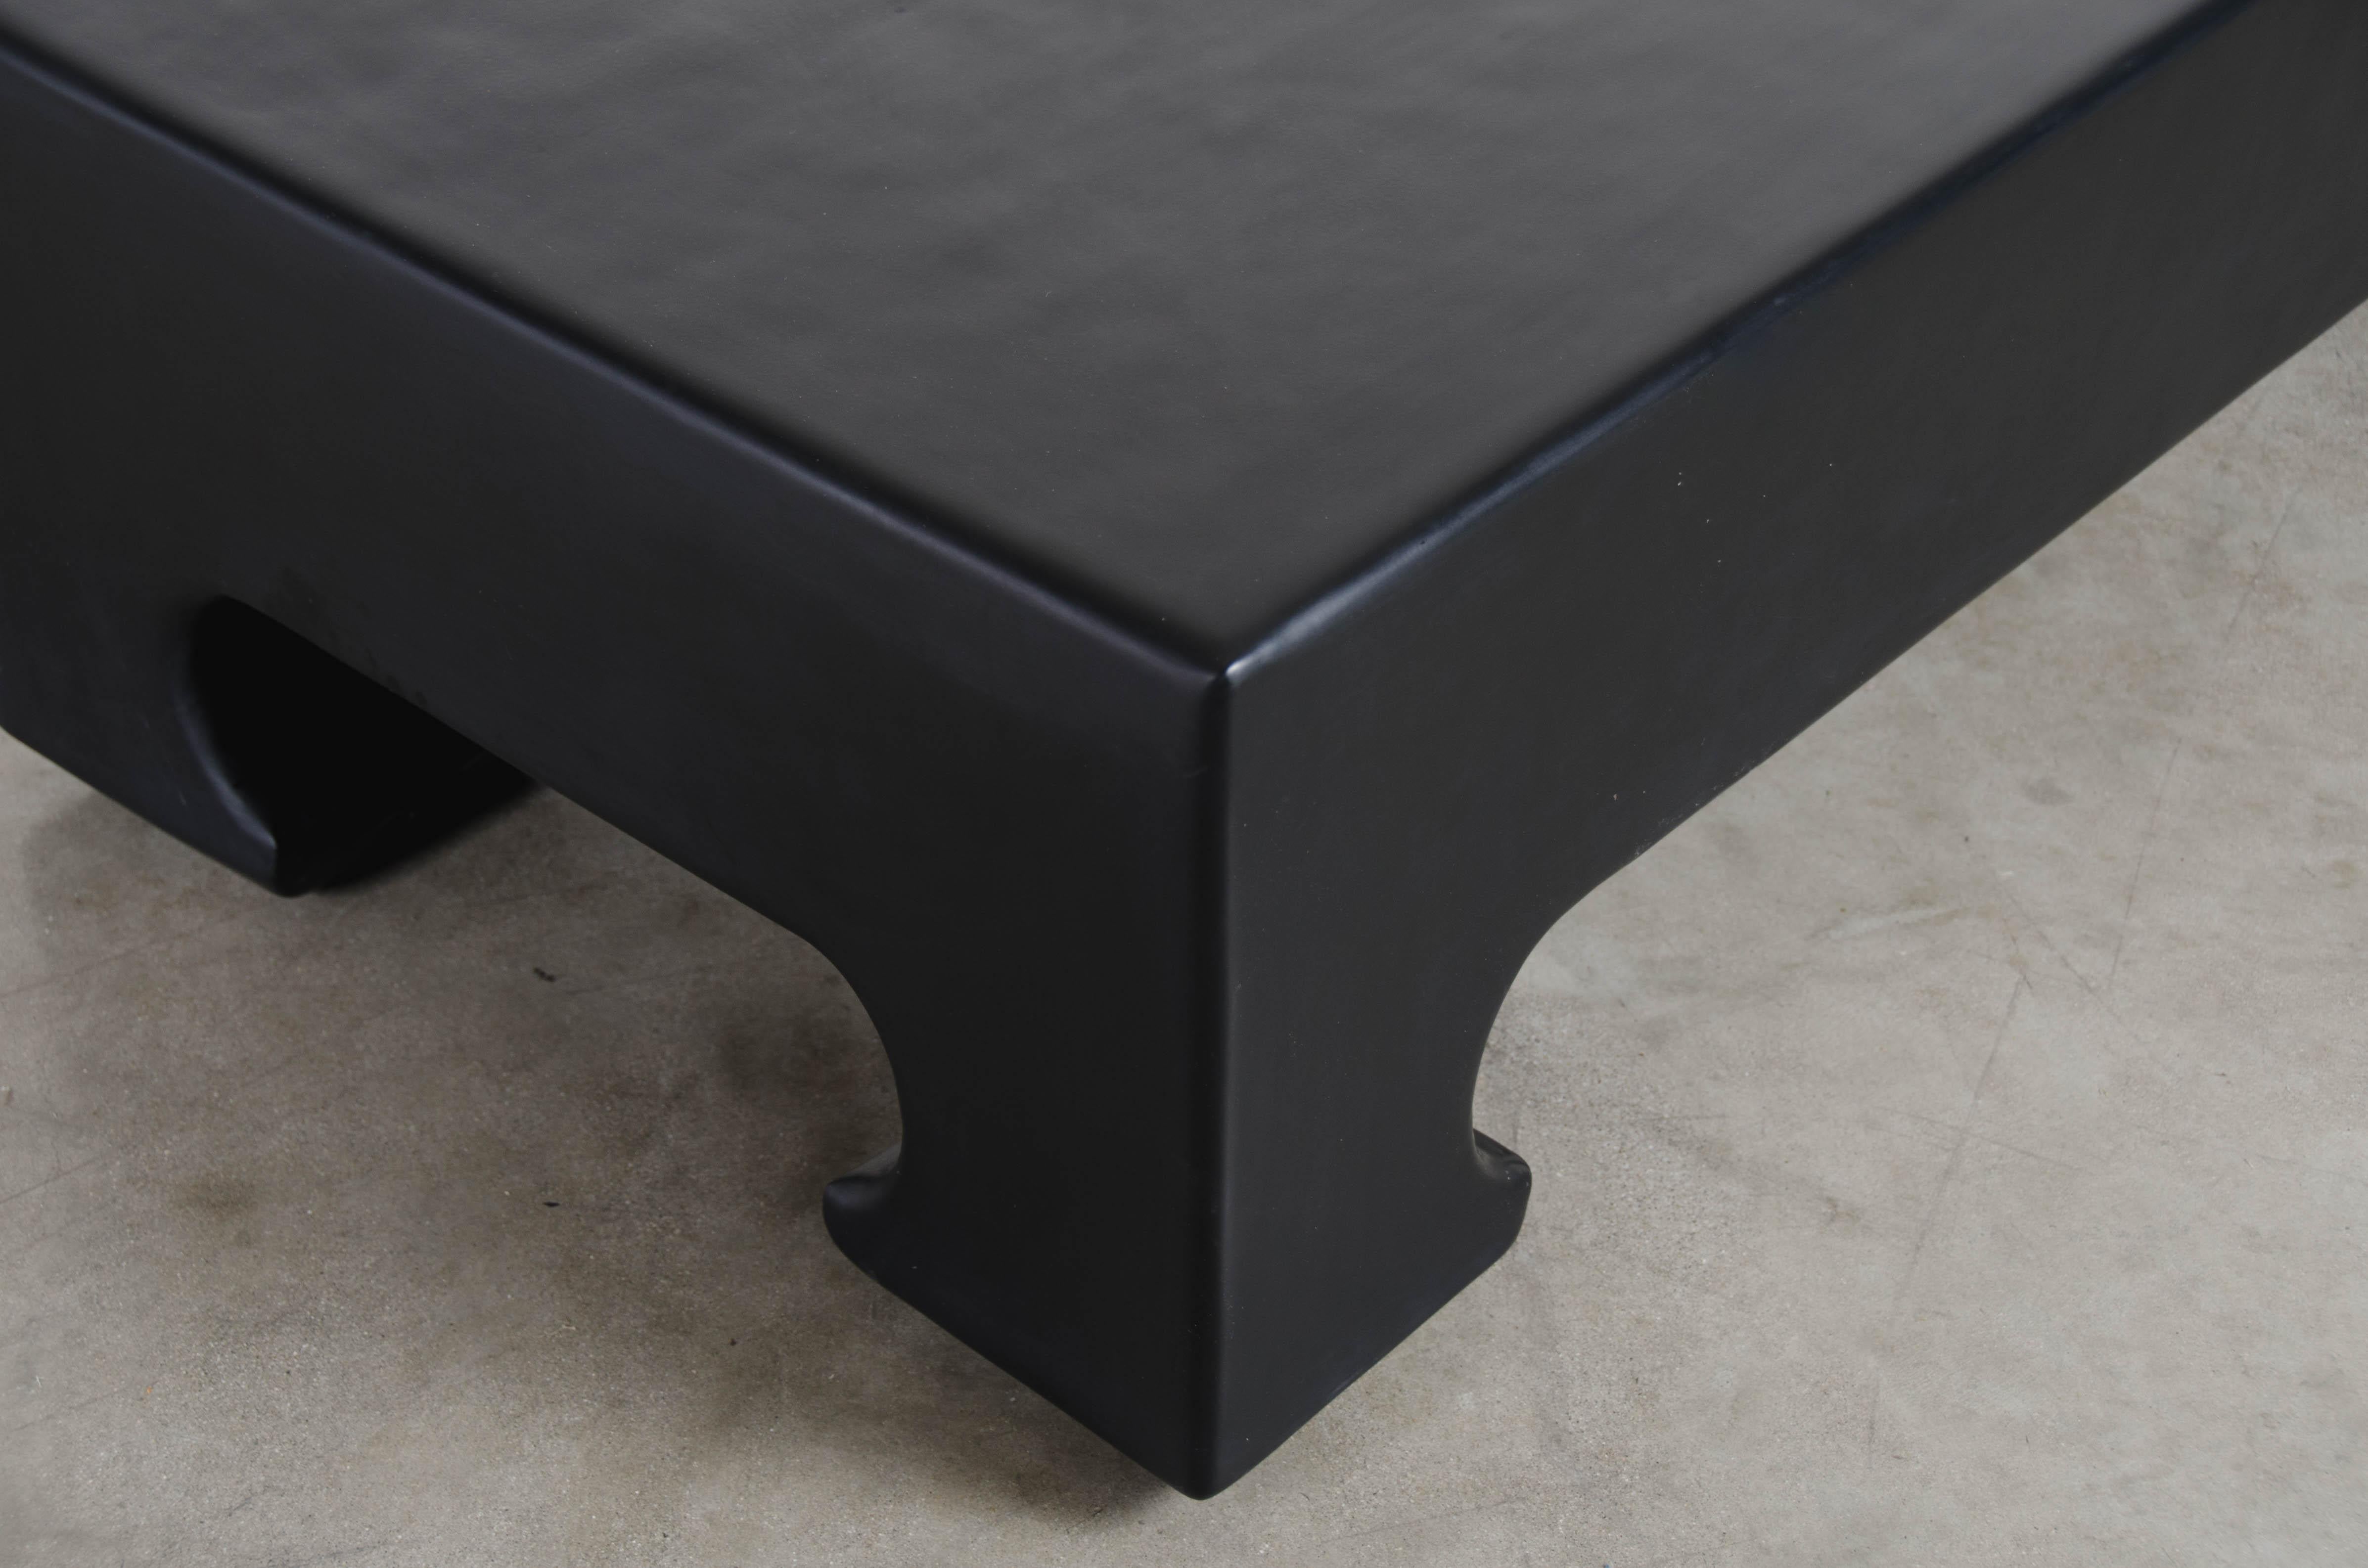 Hoof Leg Coffee Table, Black Lacquer by Robert Kuo, Limited Edition 1